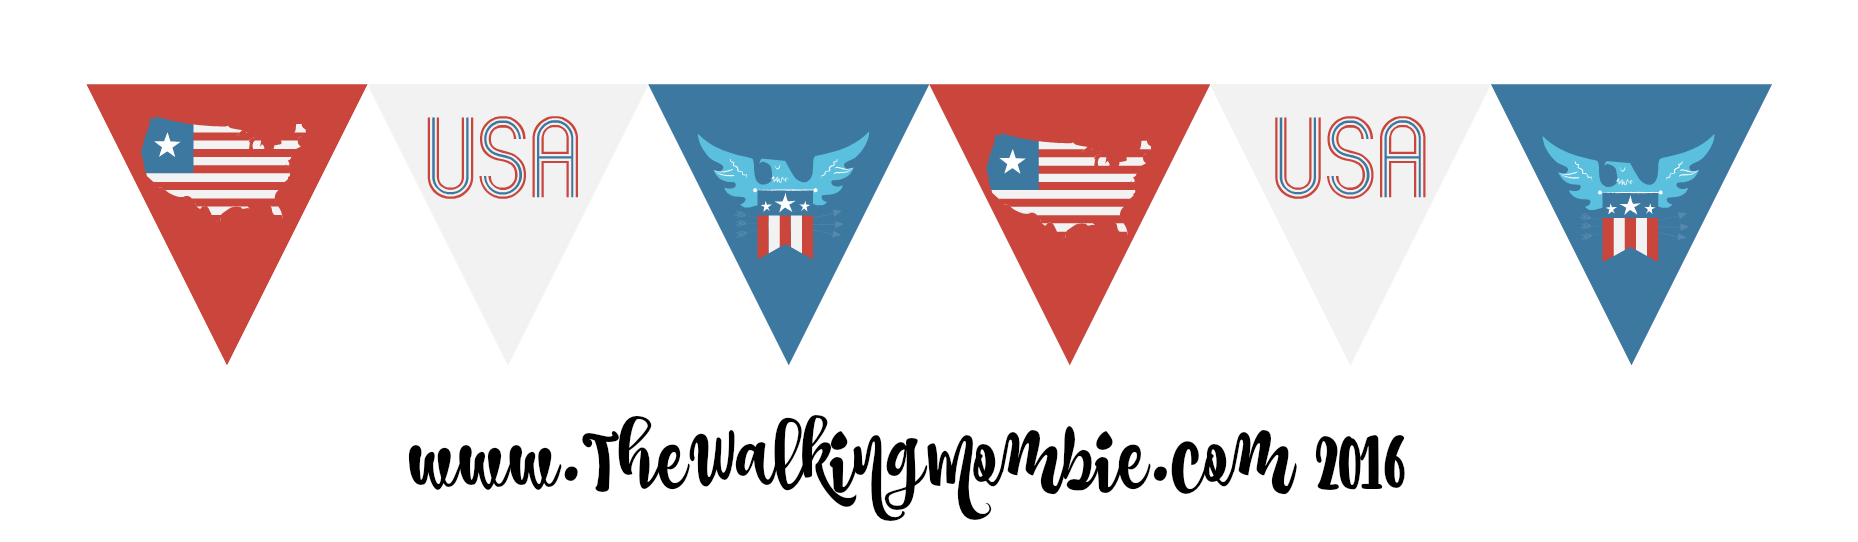 july clipart bunting